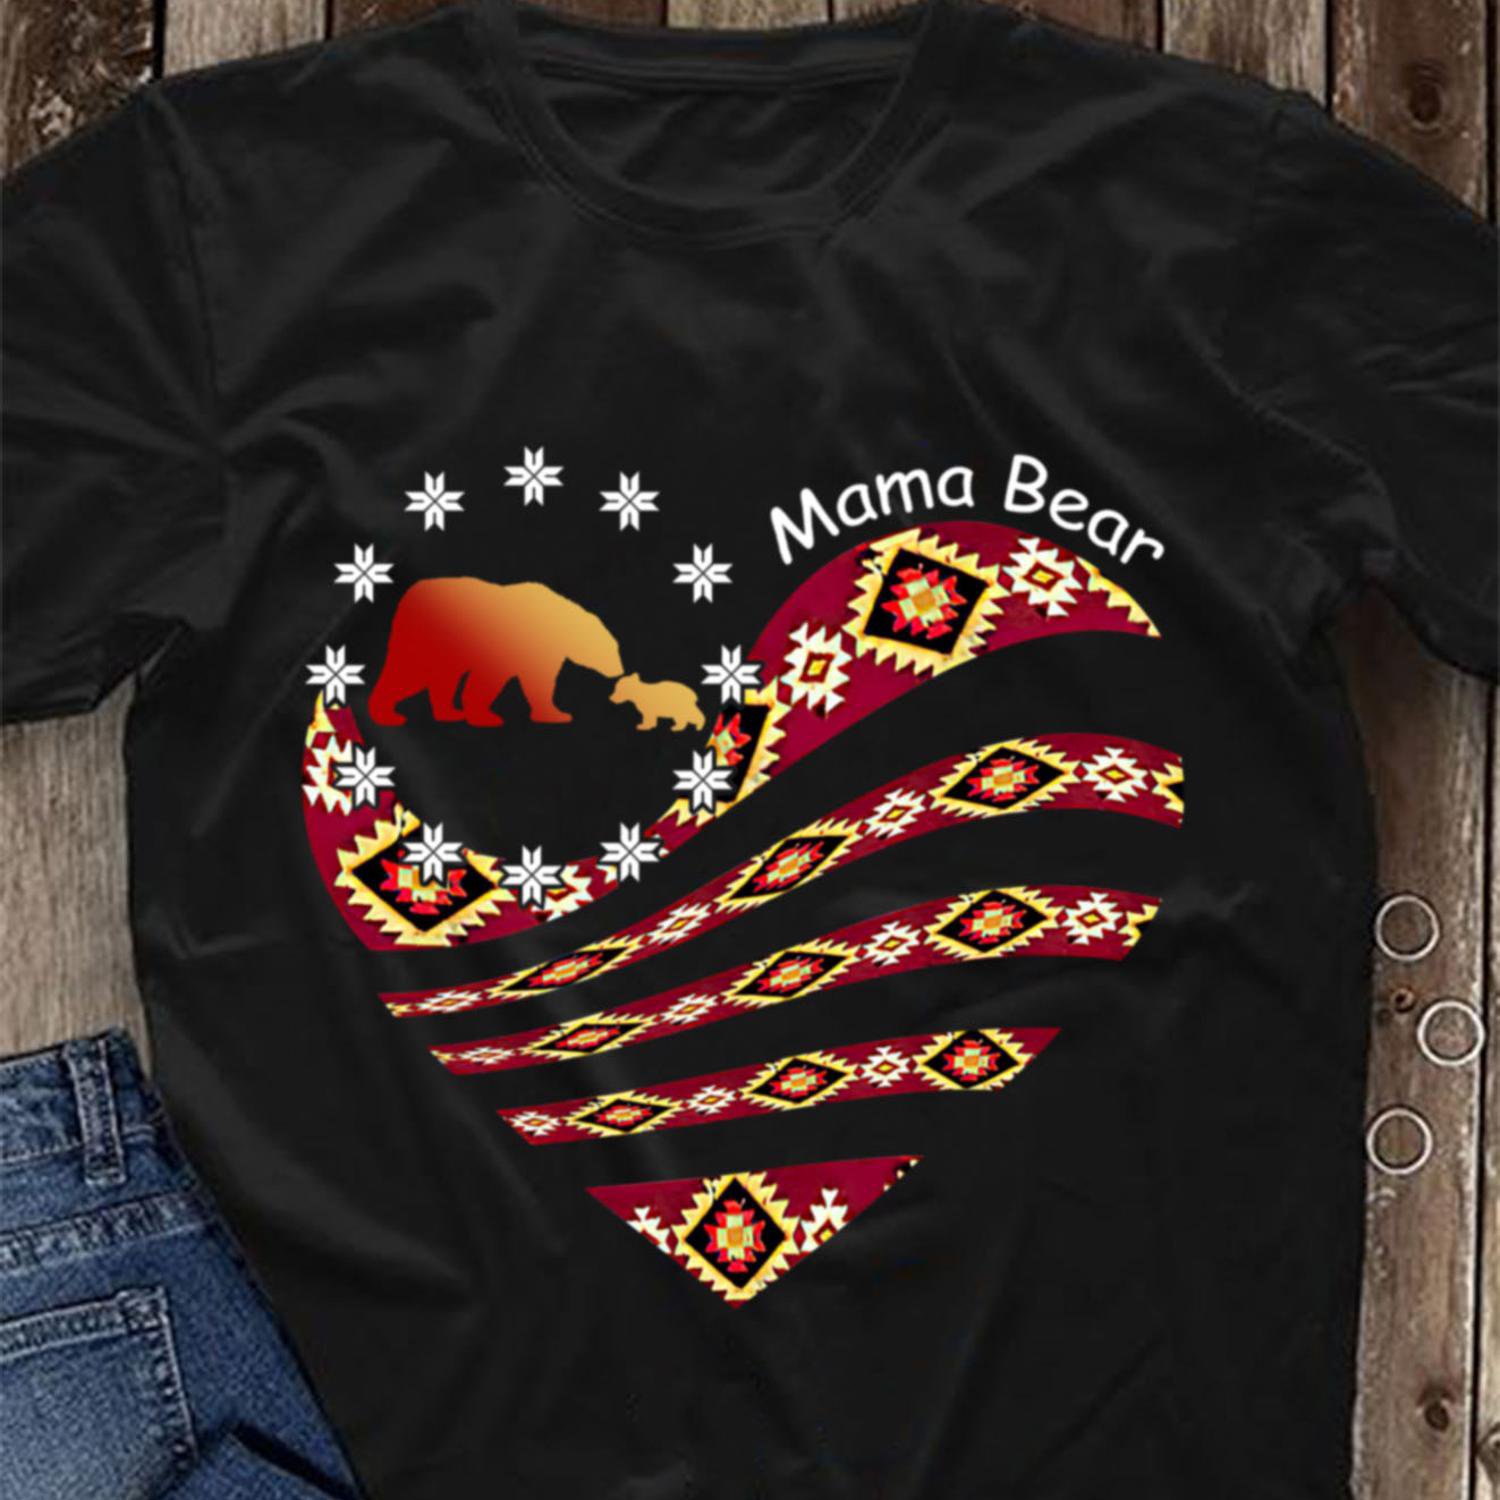 Mama Bear T-Shirt NEW DTG Print Logo Short Sleeve Soft Cotton Shirt Amazing Mother Day Adults Gift